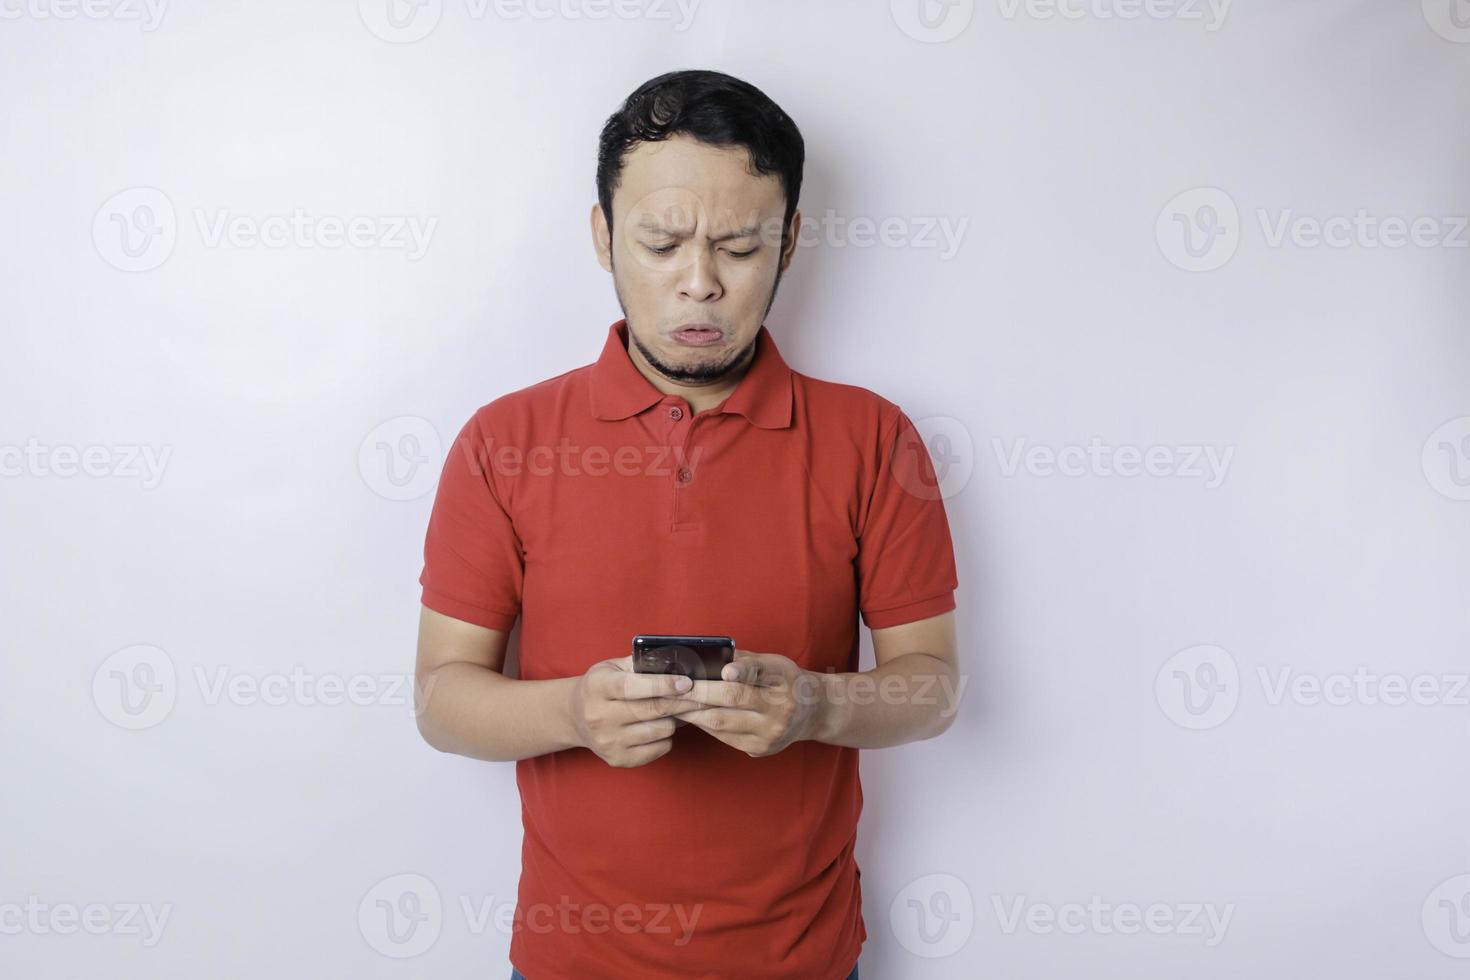 A dissatisfied young Asian man looks disgruntled wearing red t-shirt irritated face expressions holding his phone photo